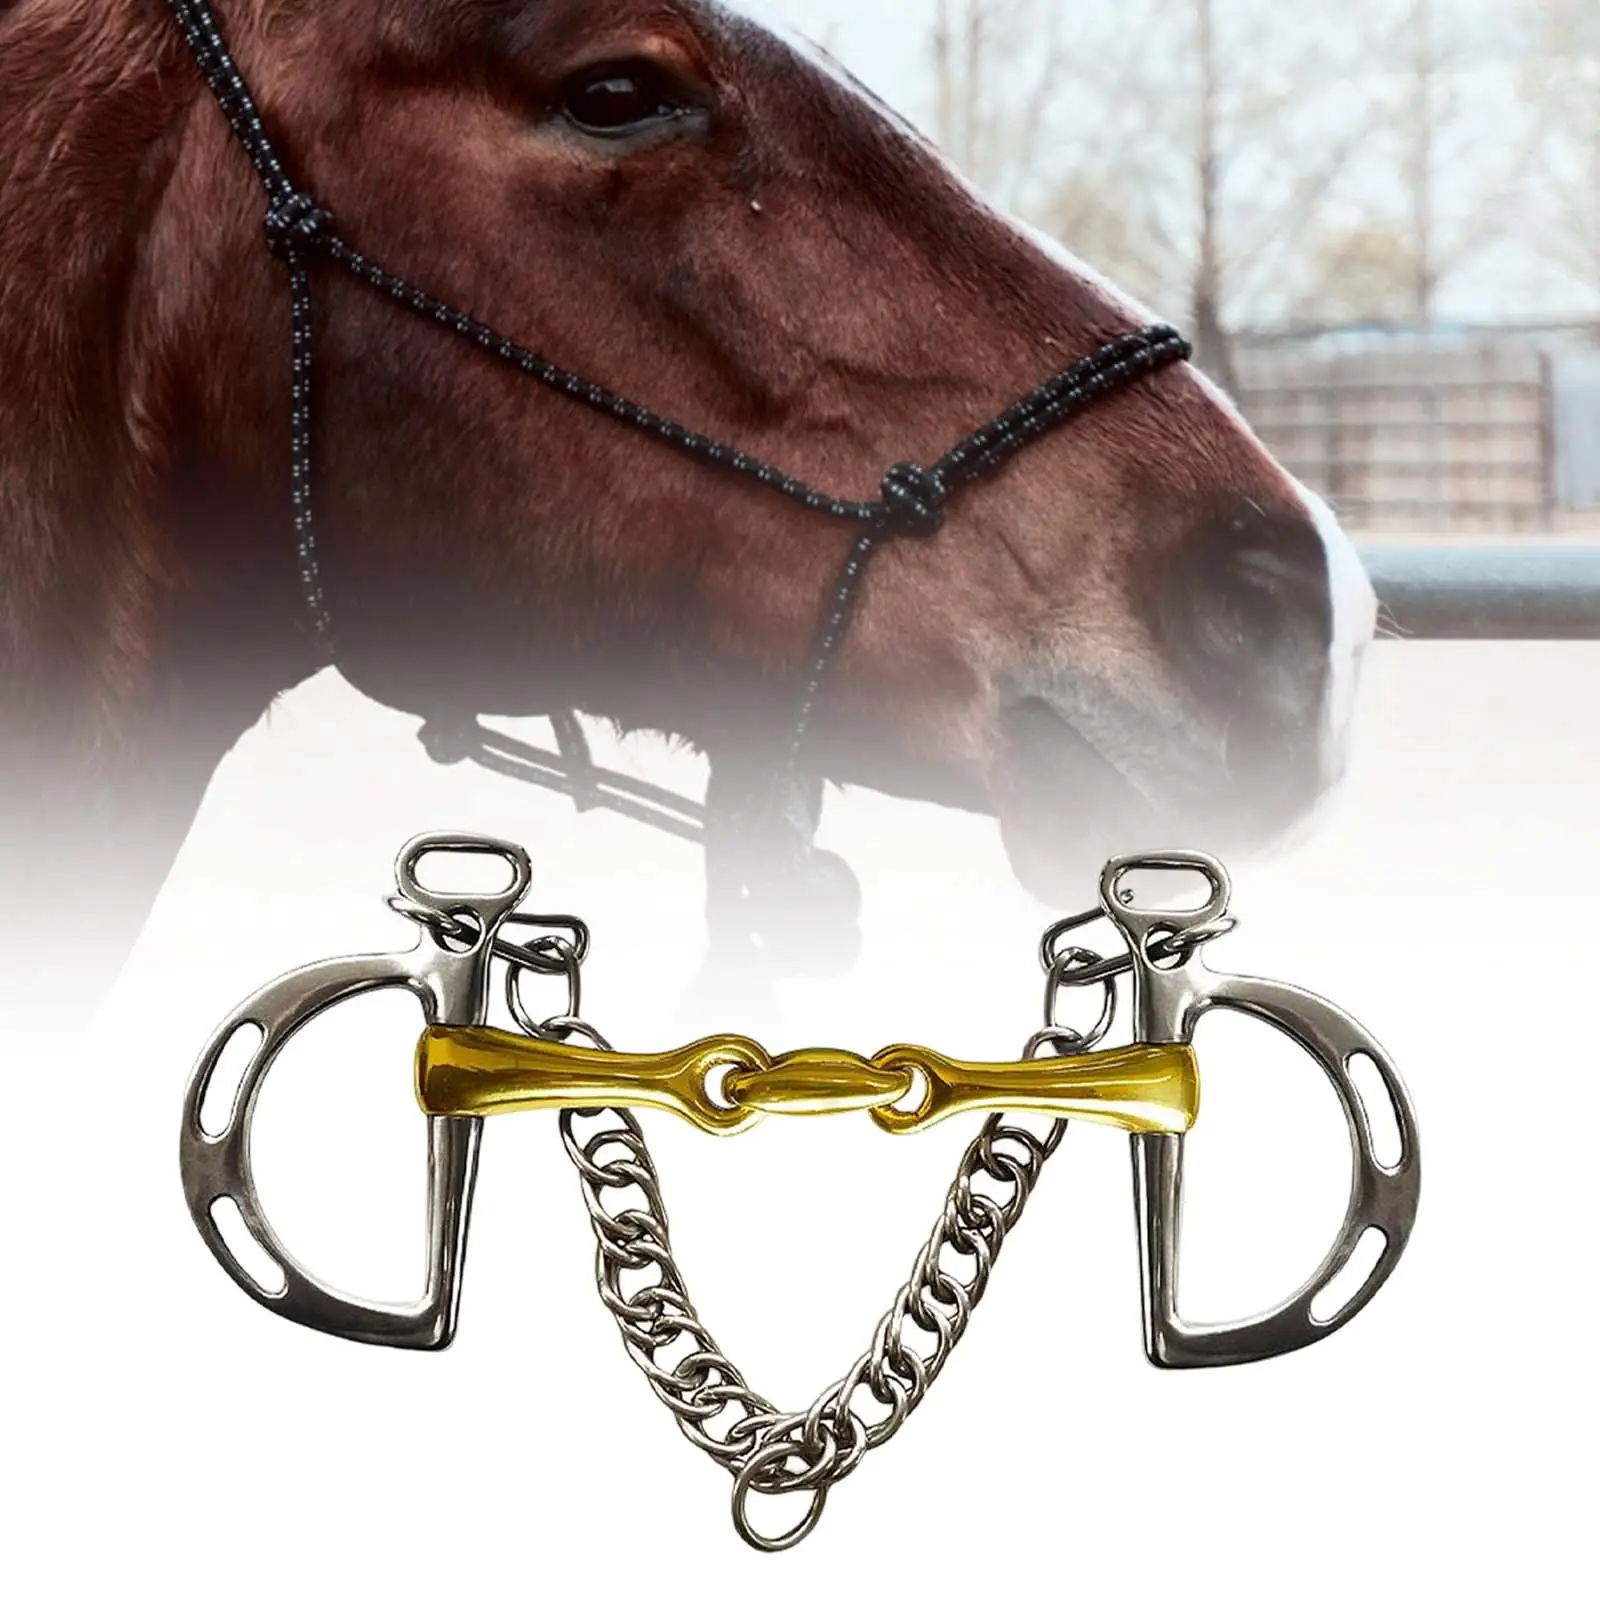 Horse Bit Copper Mouth Copper Roller with Curb Hooks Chain Cheek Stainless Steel